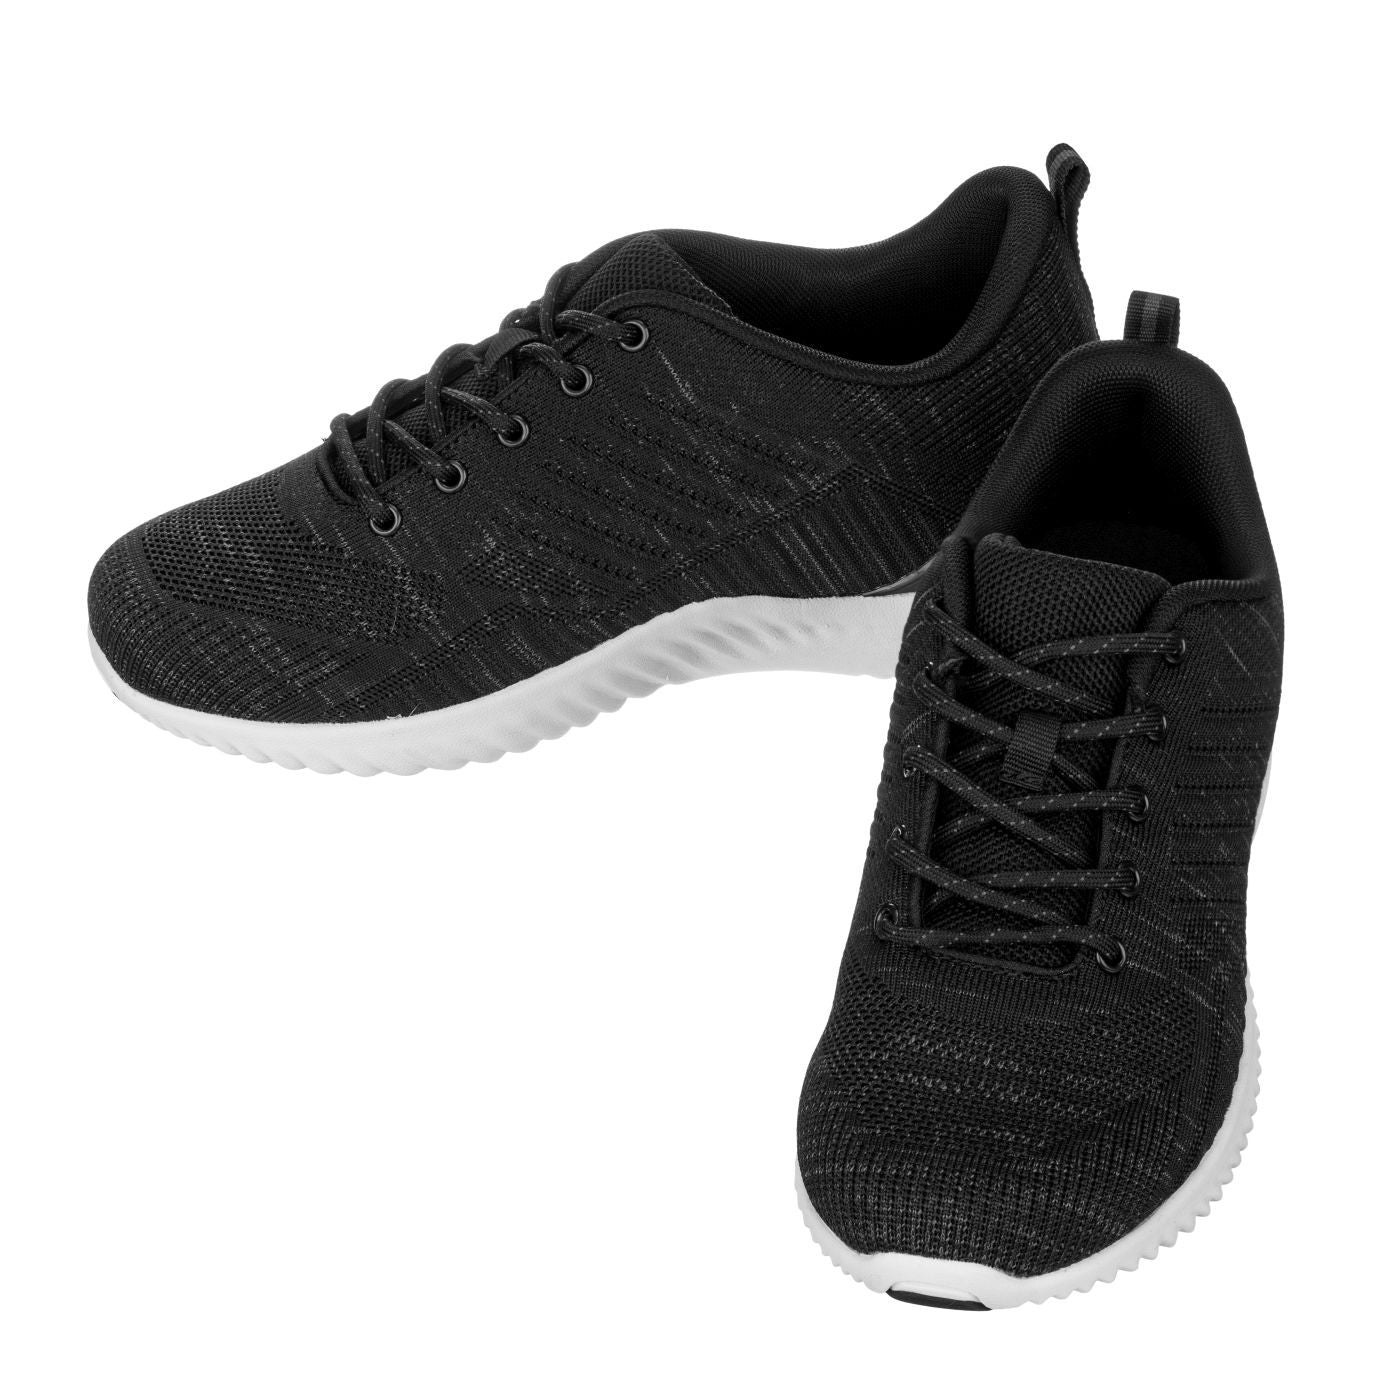 Elevator shoes height increase CALTO - Q212 - 2.6 Inches Taller (Black/Grey) - Ultra Lightweight